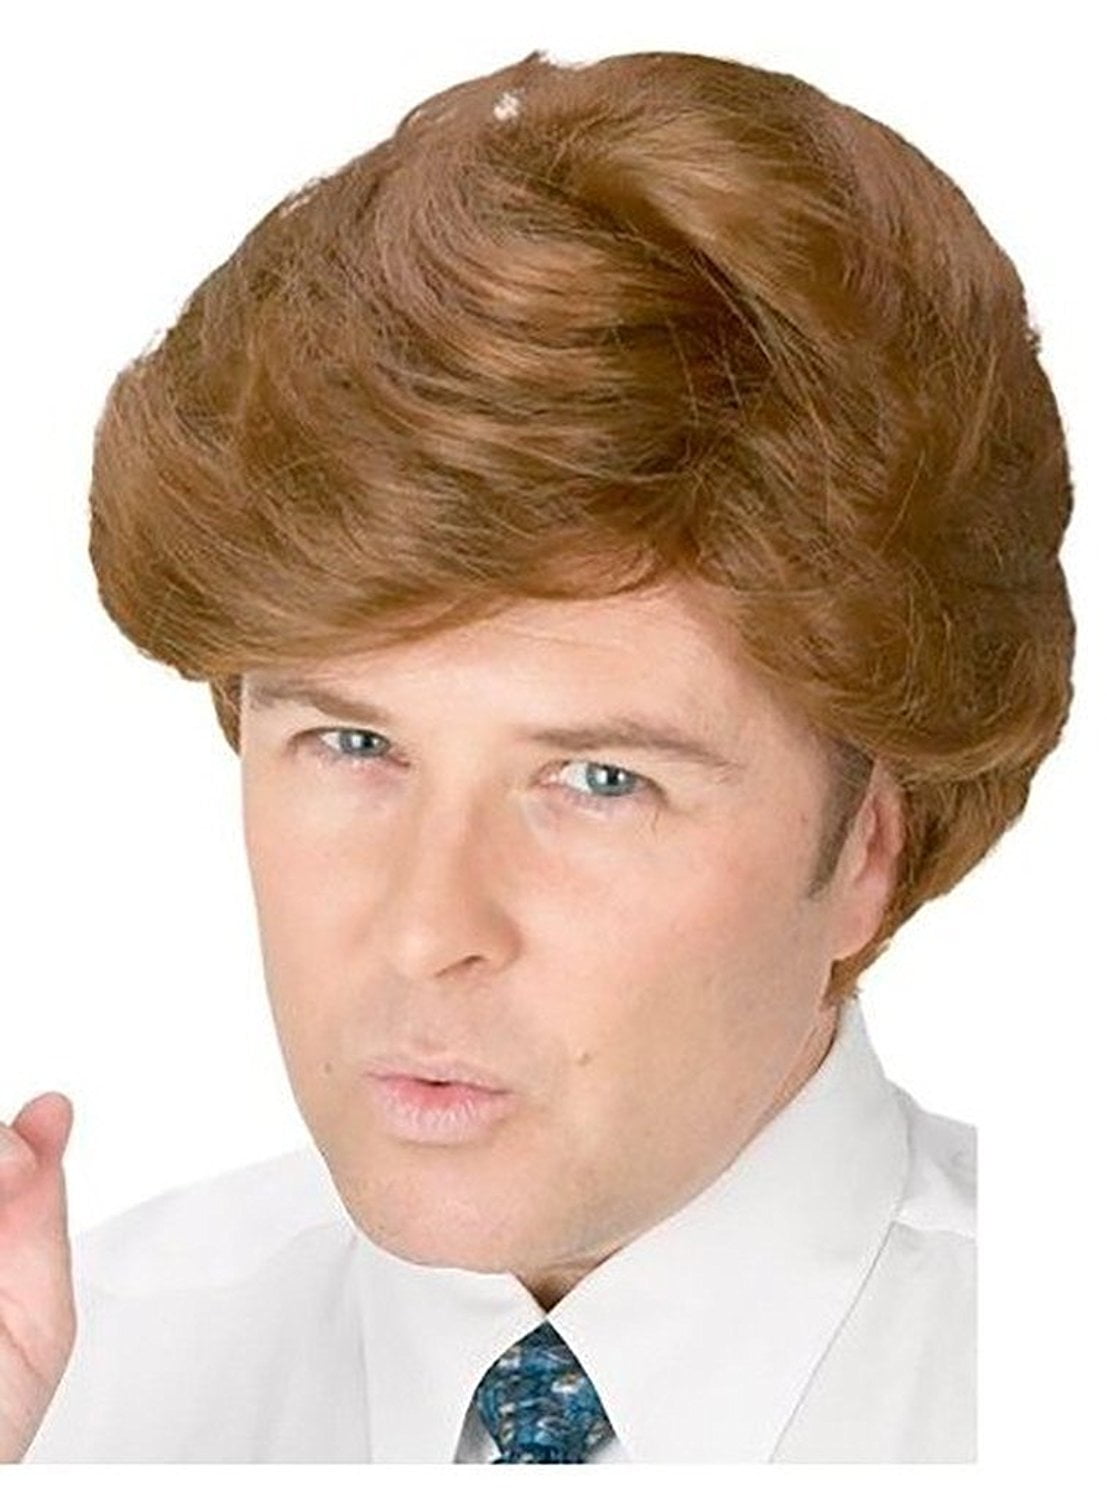 Donald Trump Half Face Mask & Blond Comb Over Candidate Wig US President Costume 